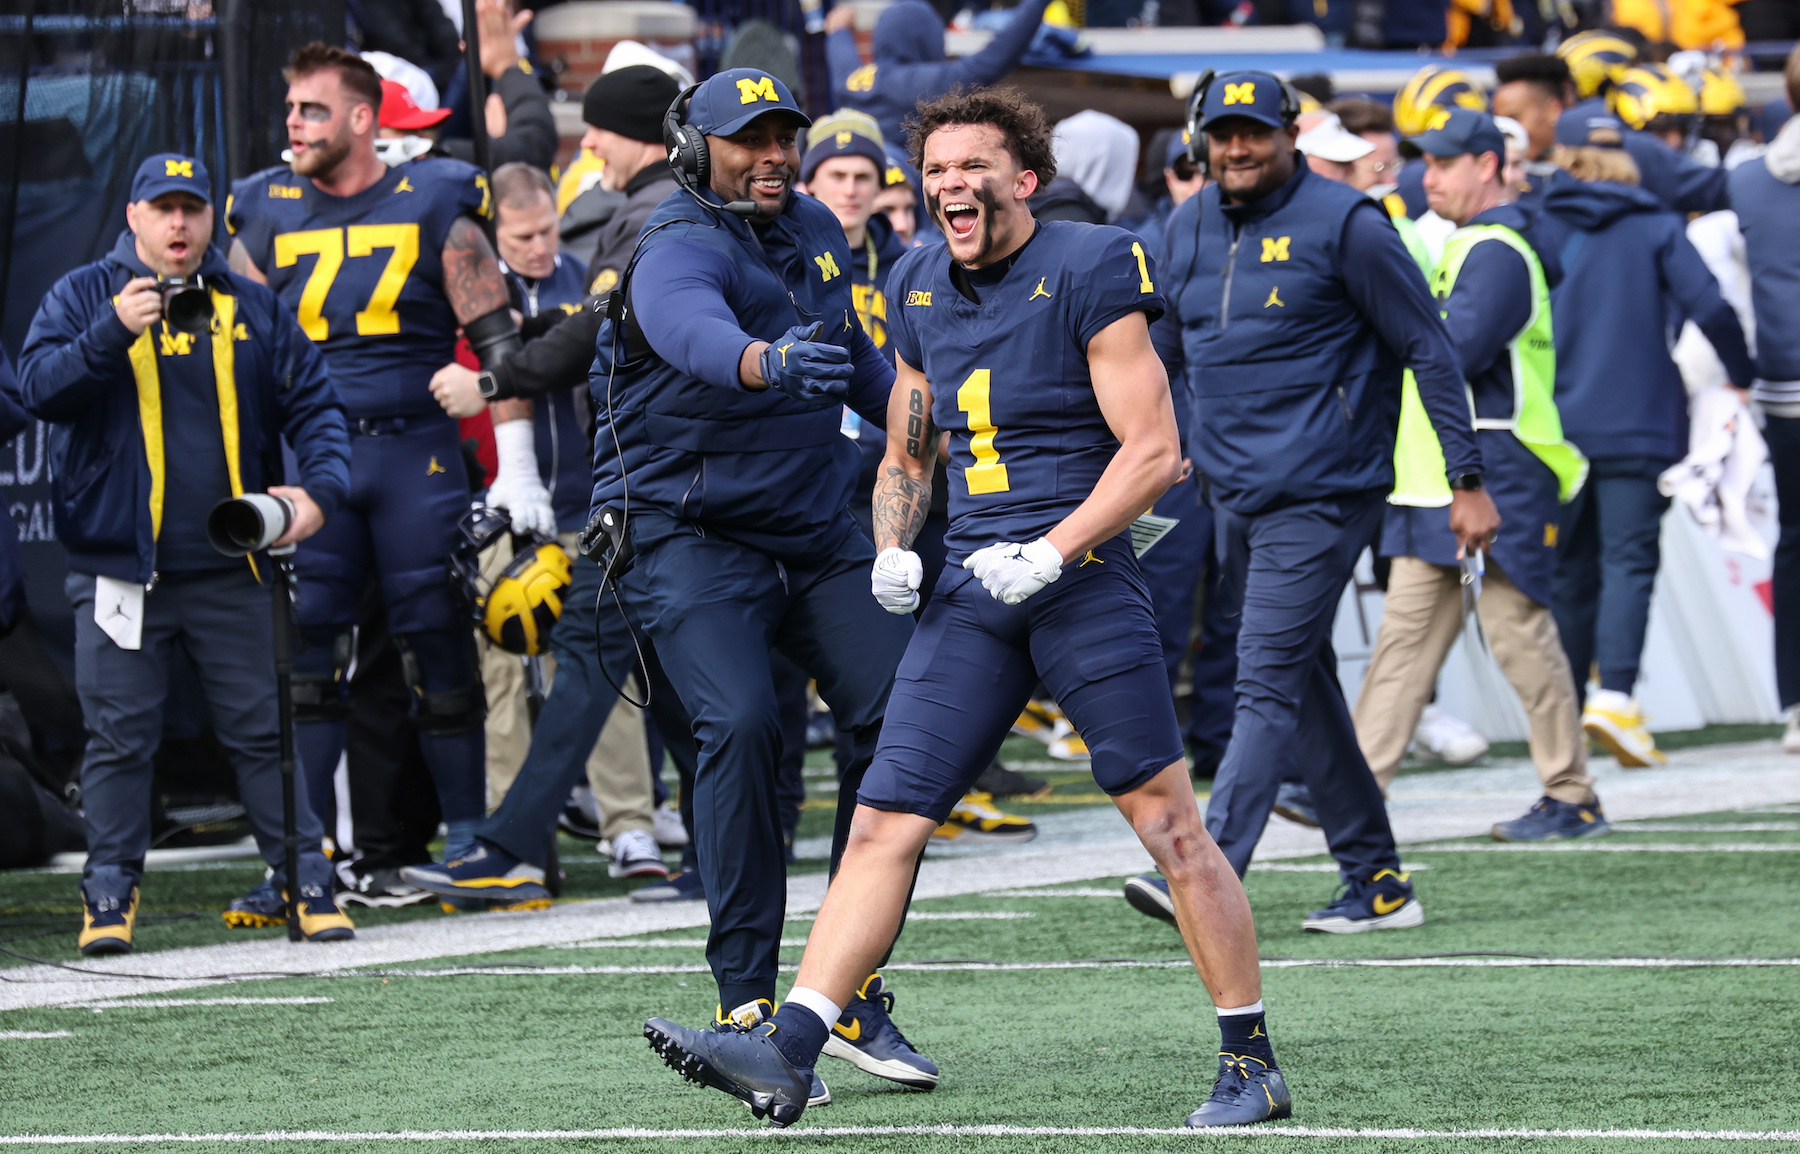 Michigan players celebrate during a game against Ohio State.